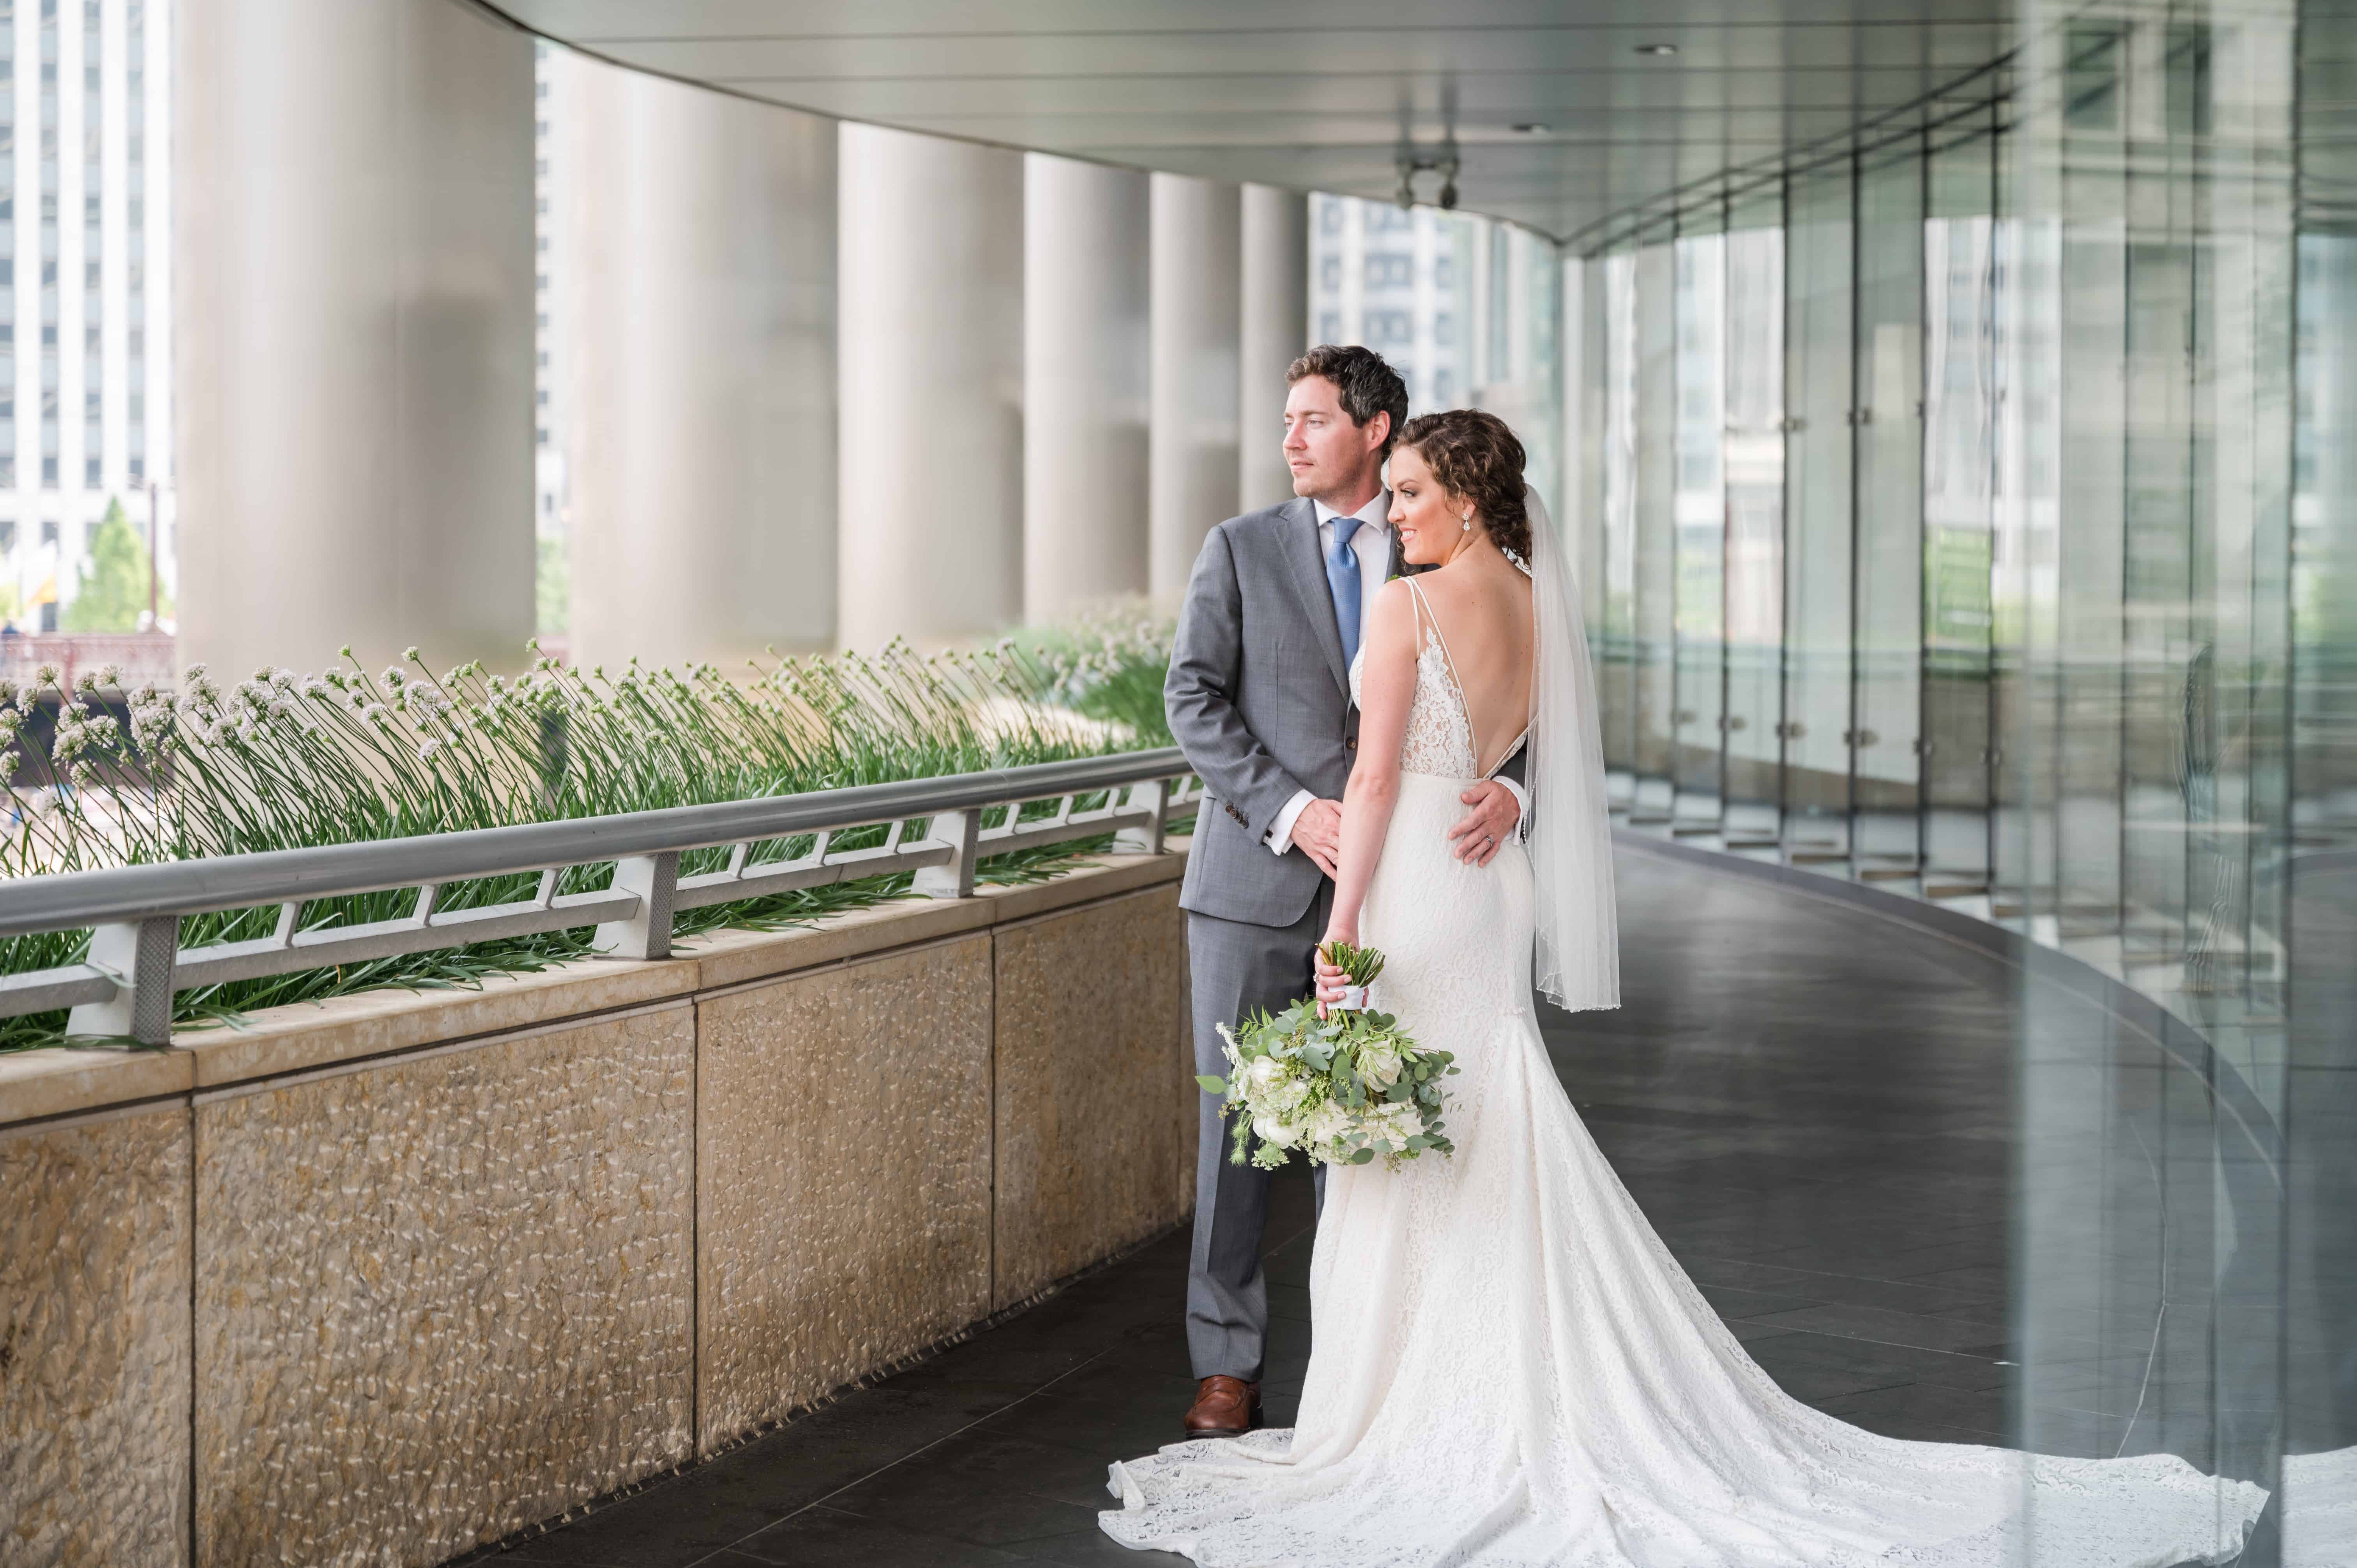 Chicago Wedding Portrait of Bride and Groom in Downtown Chicago.